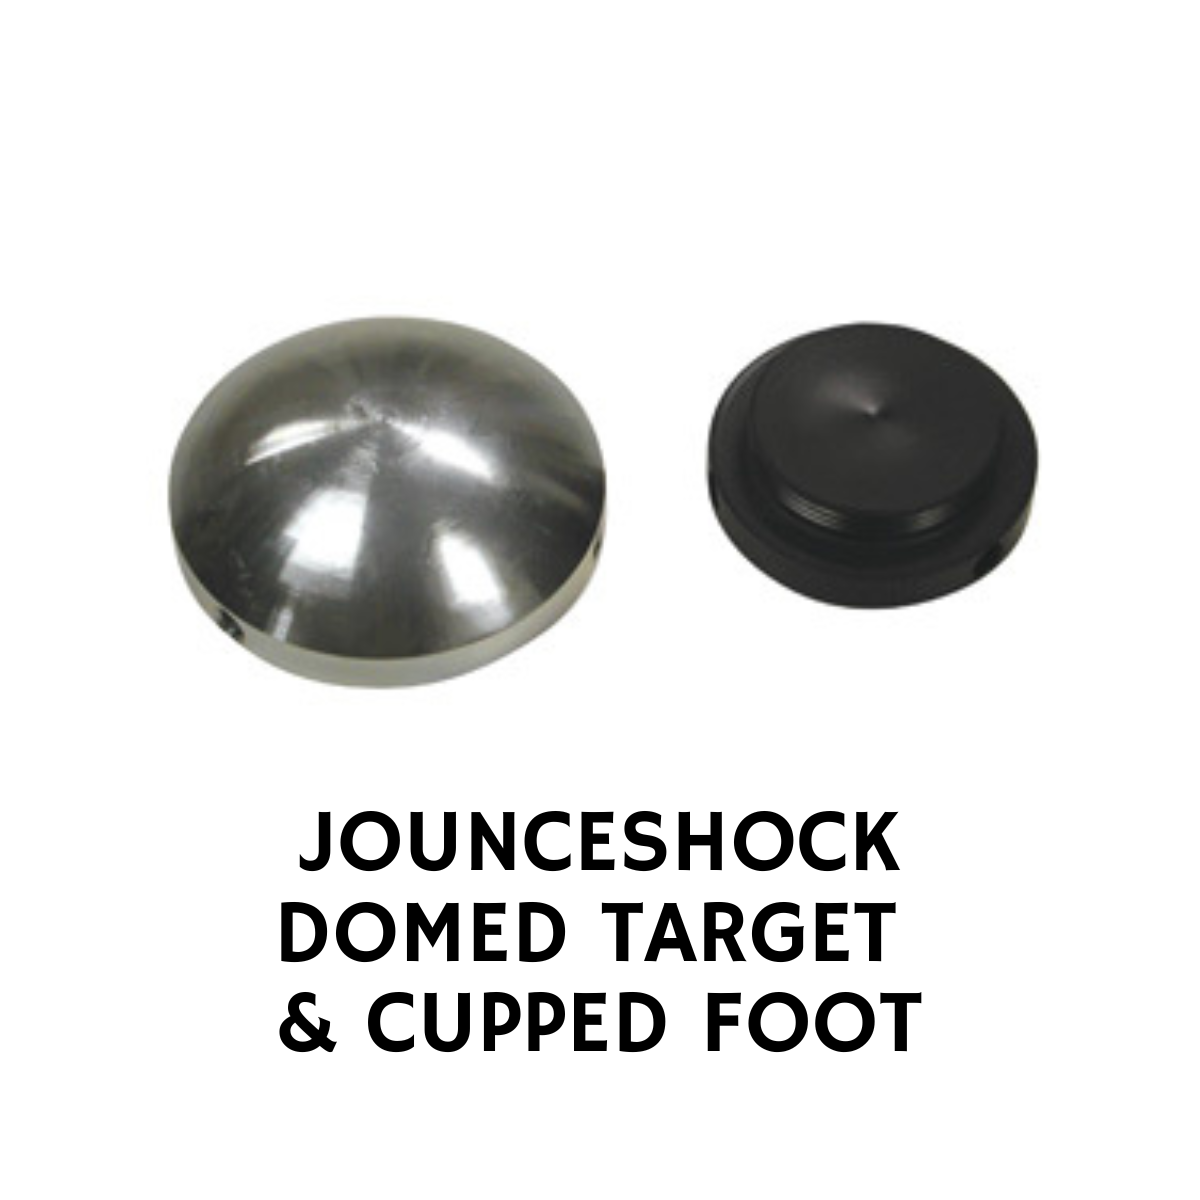 JOUNCESHOCK DOMED TARGET AND CUPPED FOOT